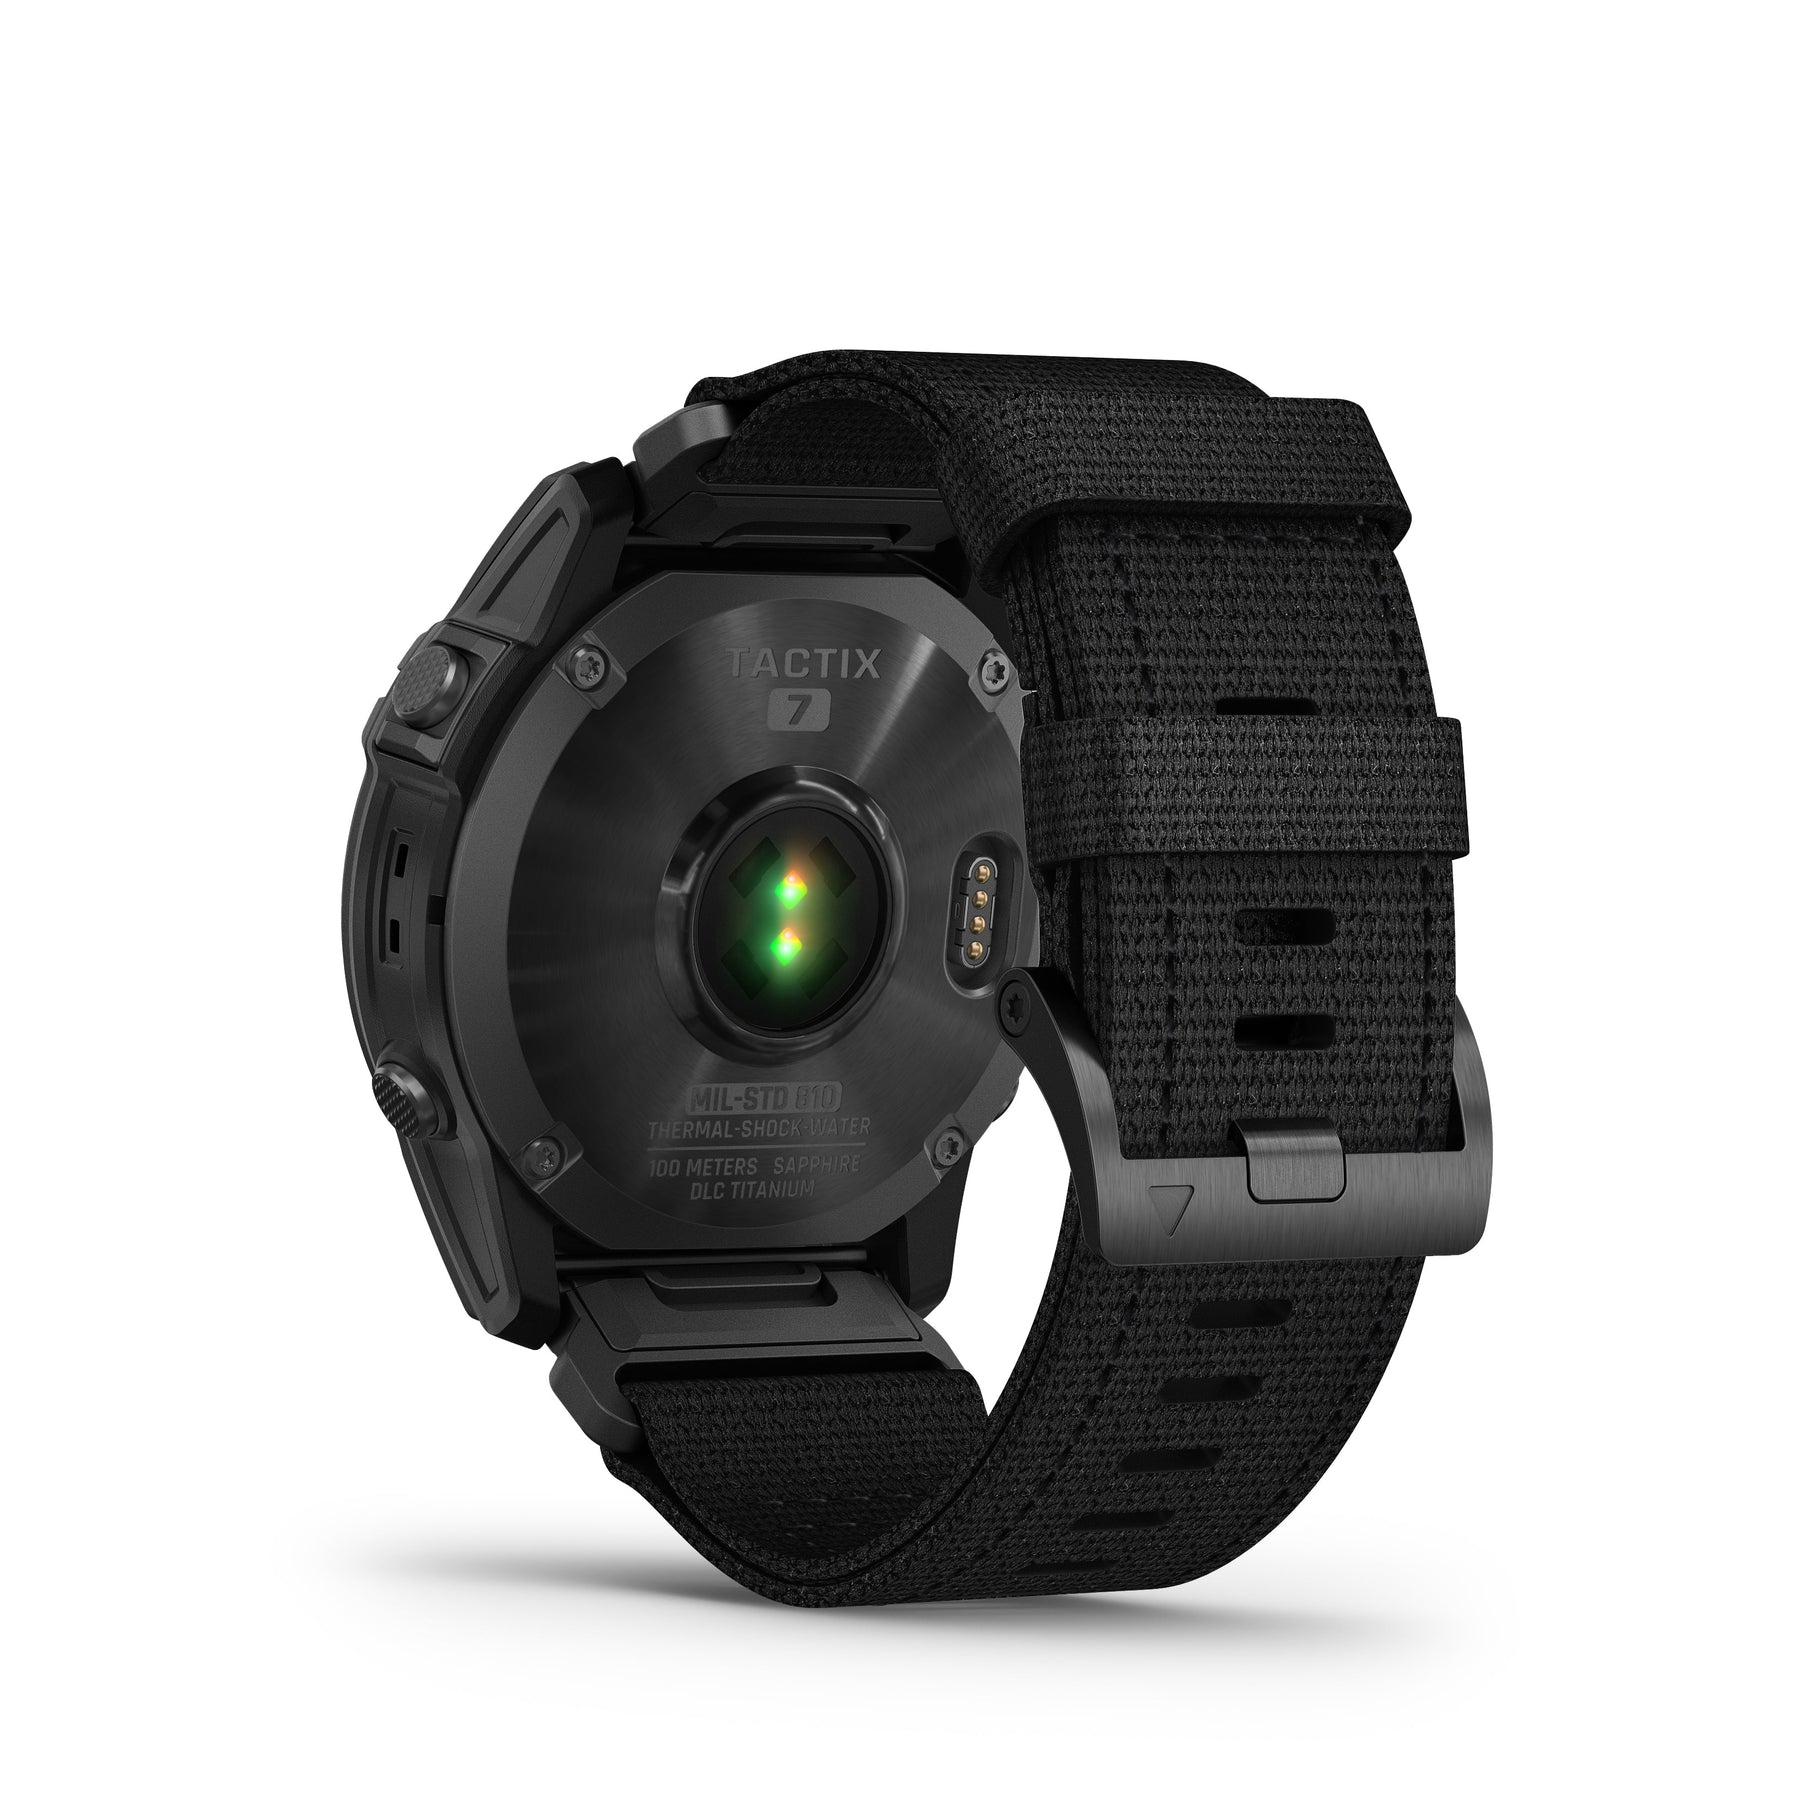 Garmin Tactix 7 Tactical Multisport GPS with Wearable4U Bla – Sports and Gadgets